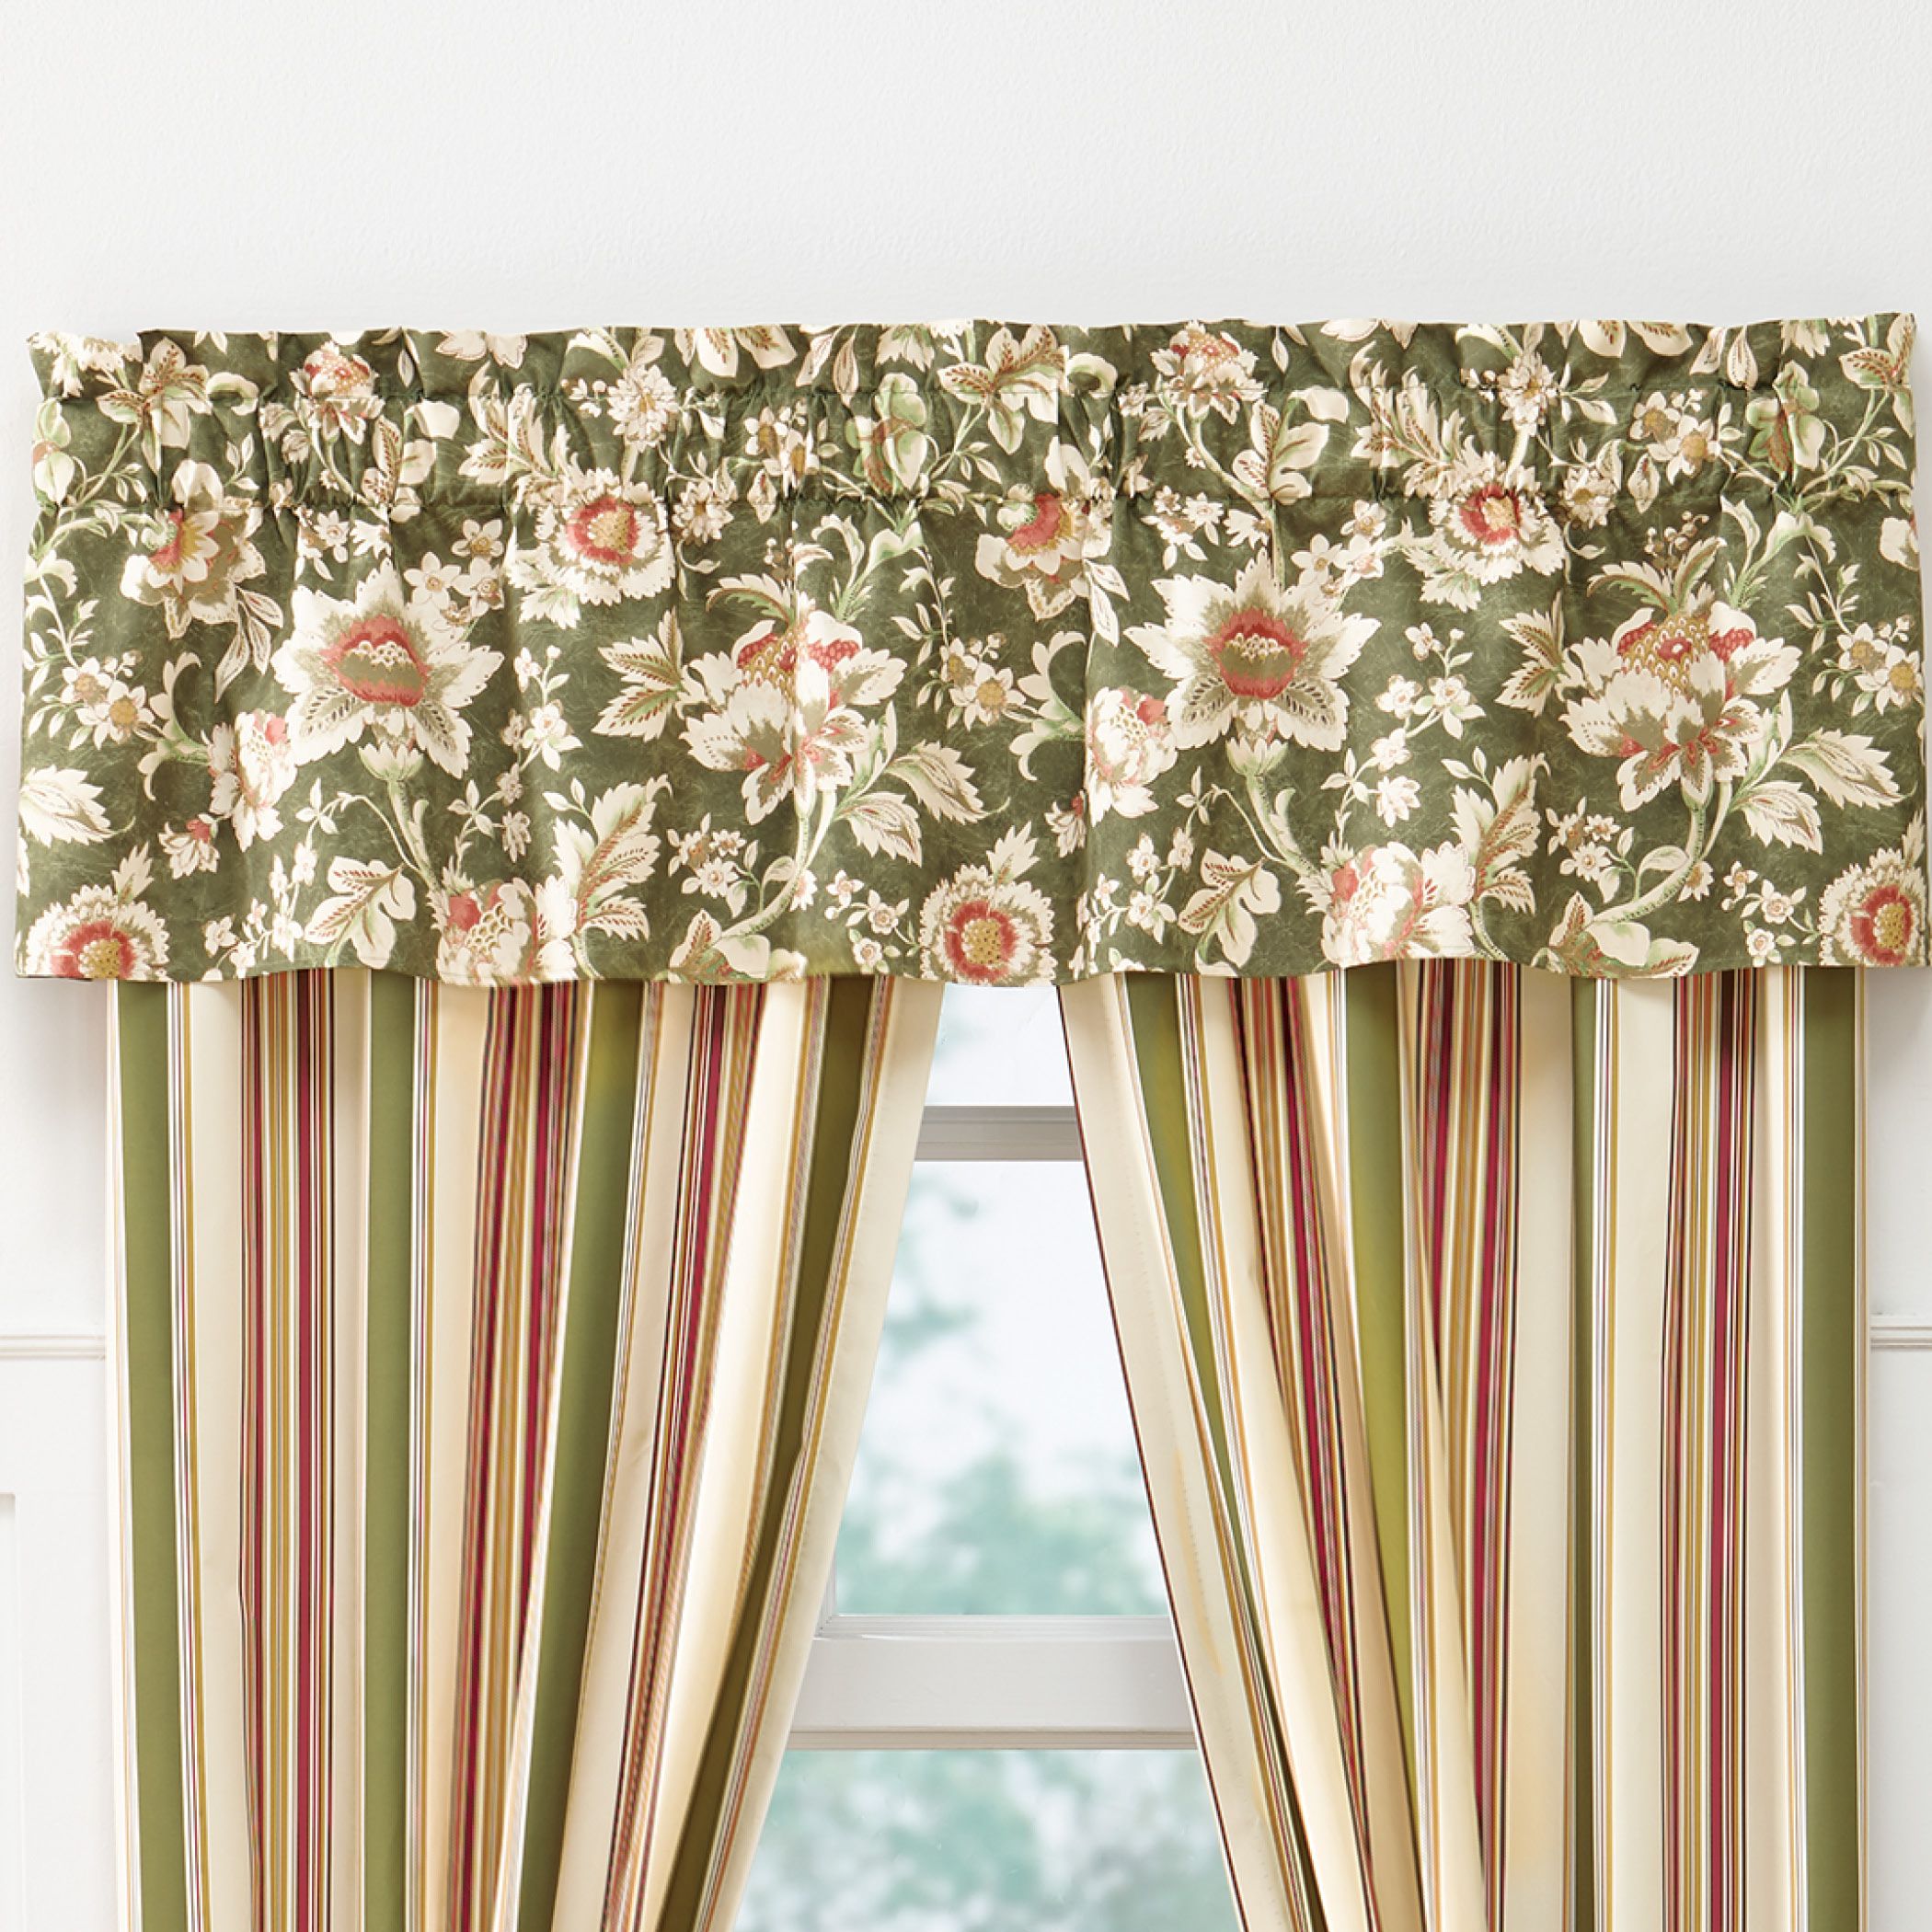 Floral Concord Window Valance Intended For Floral Pattern Window Valances (View 8 of 20)